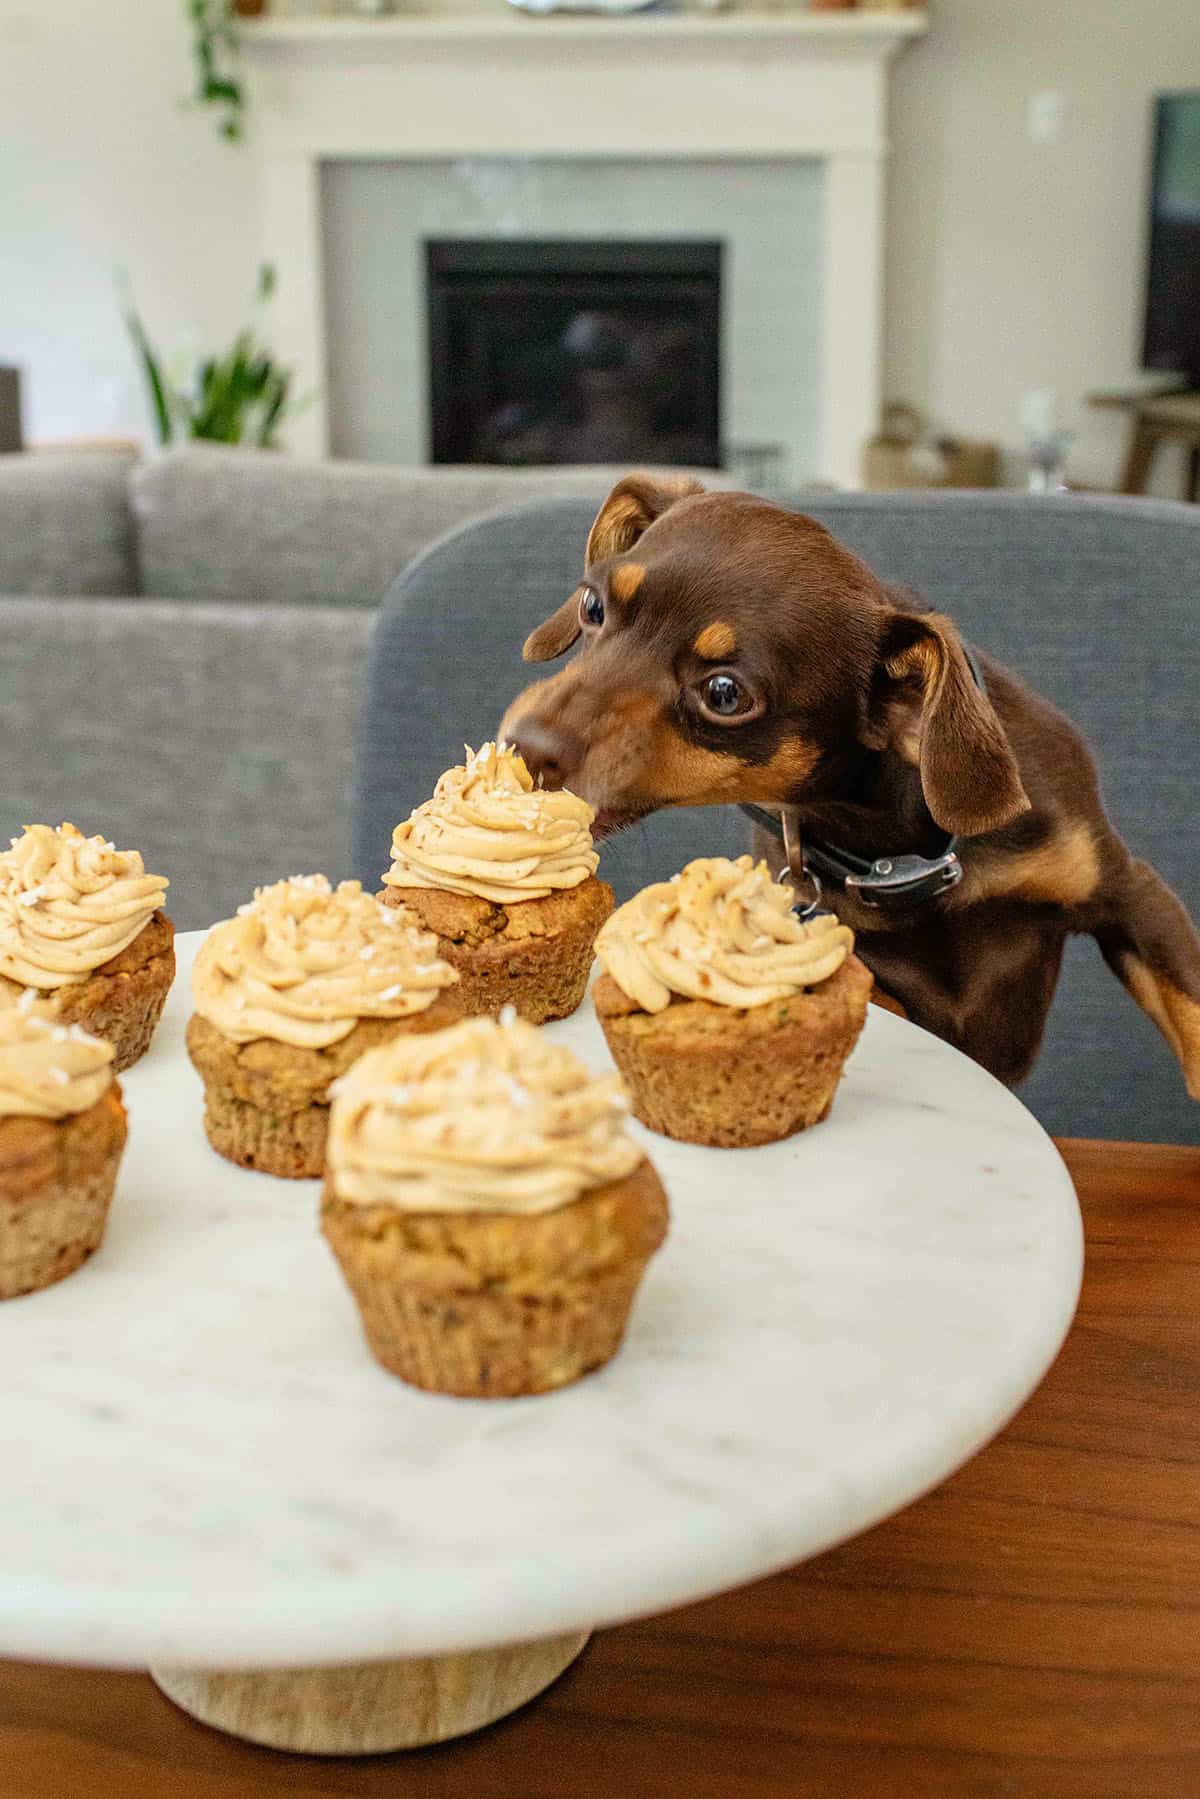 dachshund chihuahua eating dog cupcakes on off of white cake stand